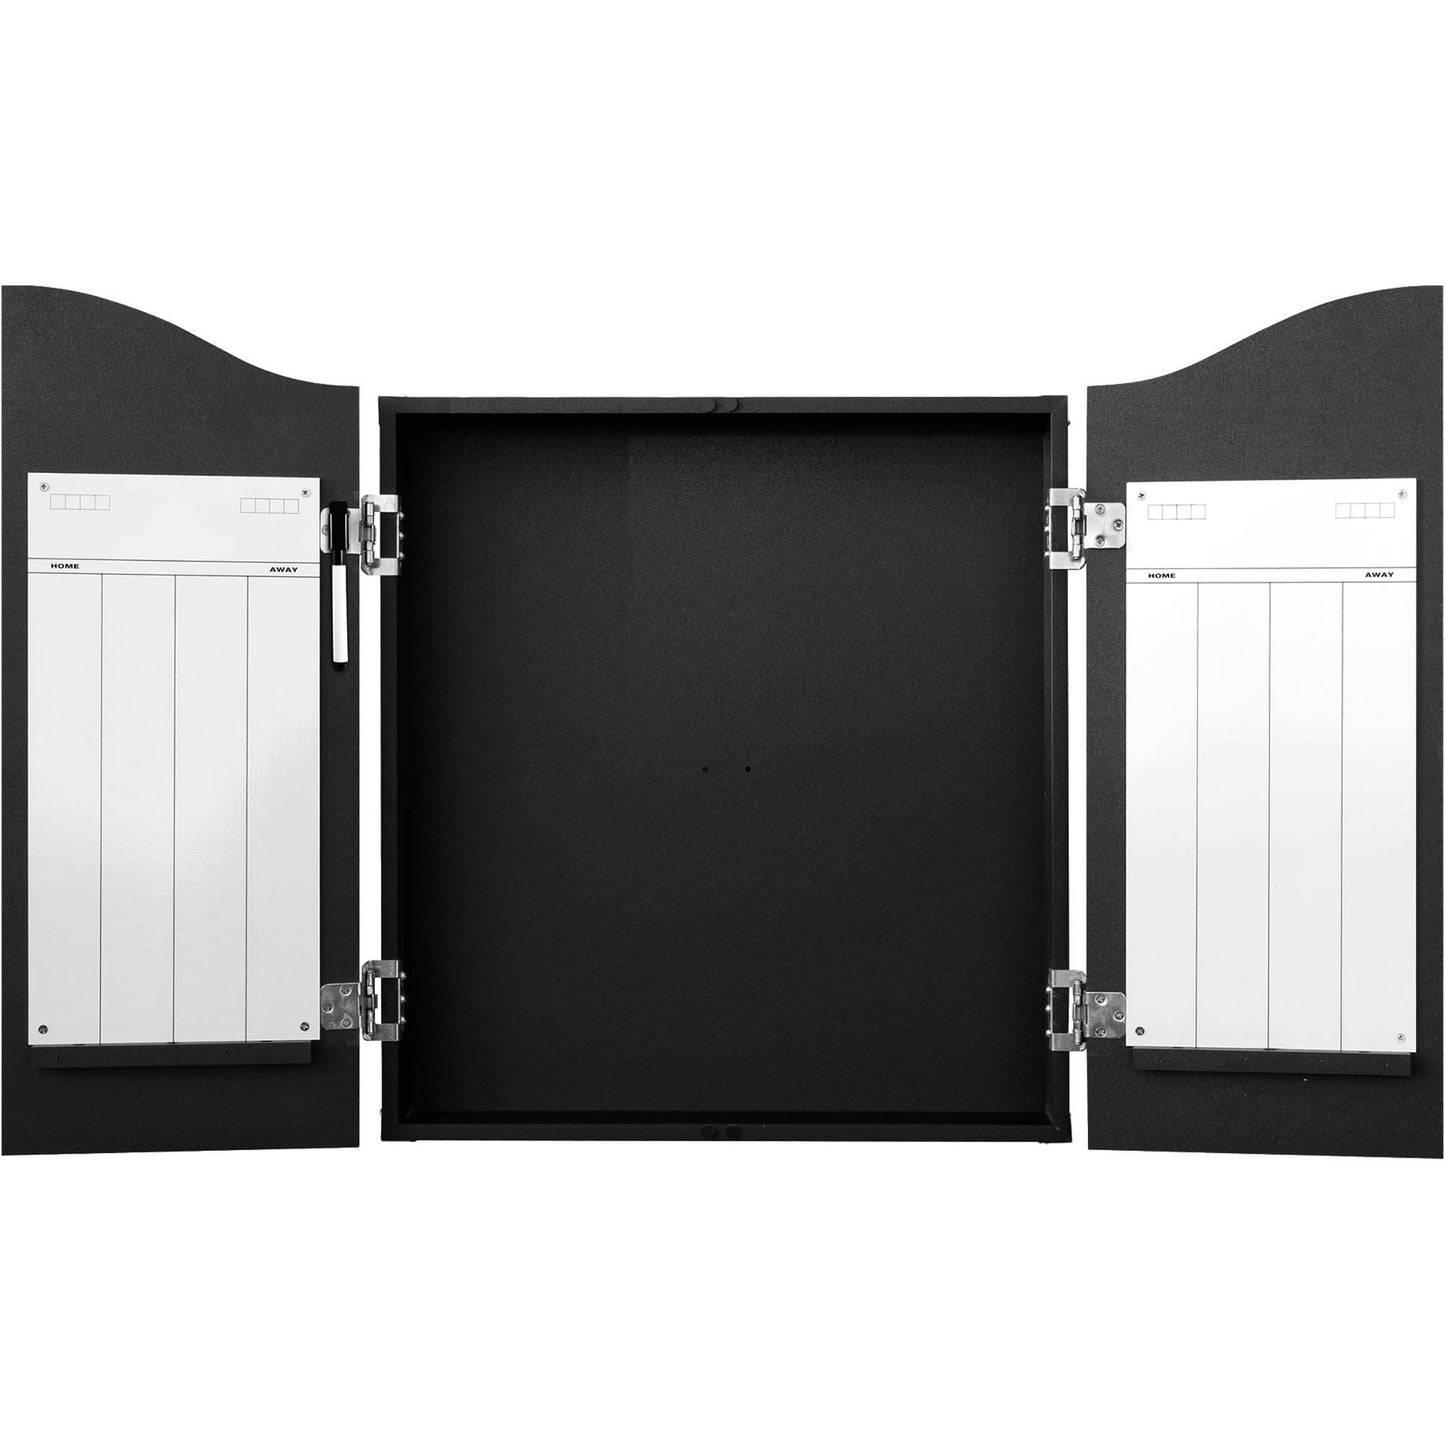 Alchemy Dartboard Cabinet - Official Licensed - Professional Design - Black - Alchemy in the UK